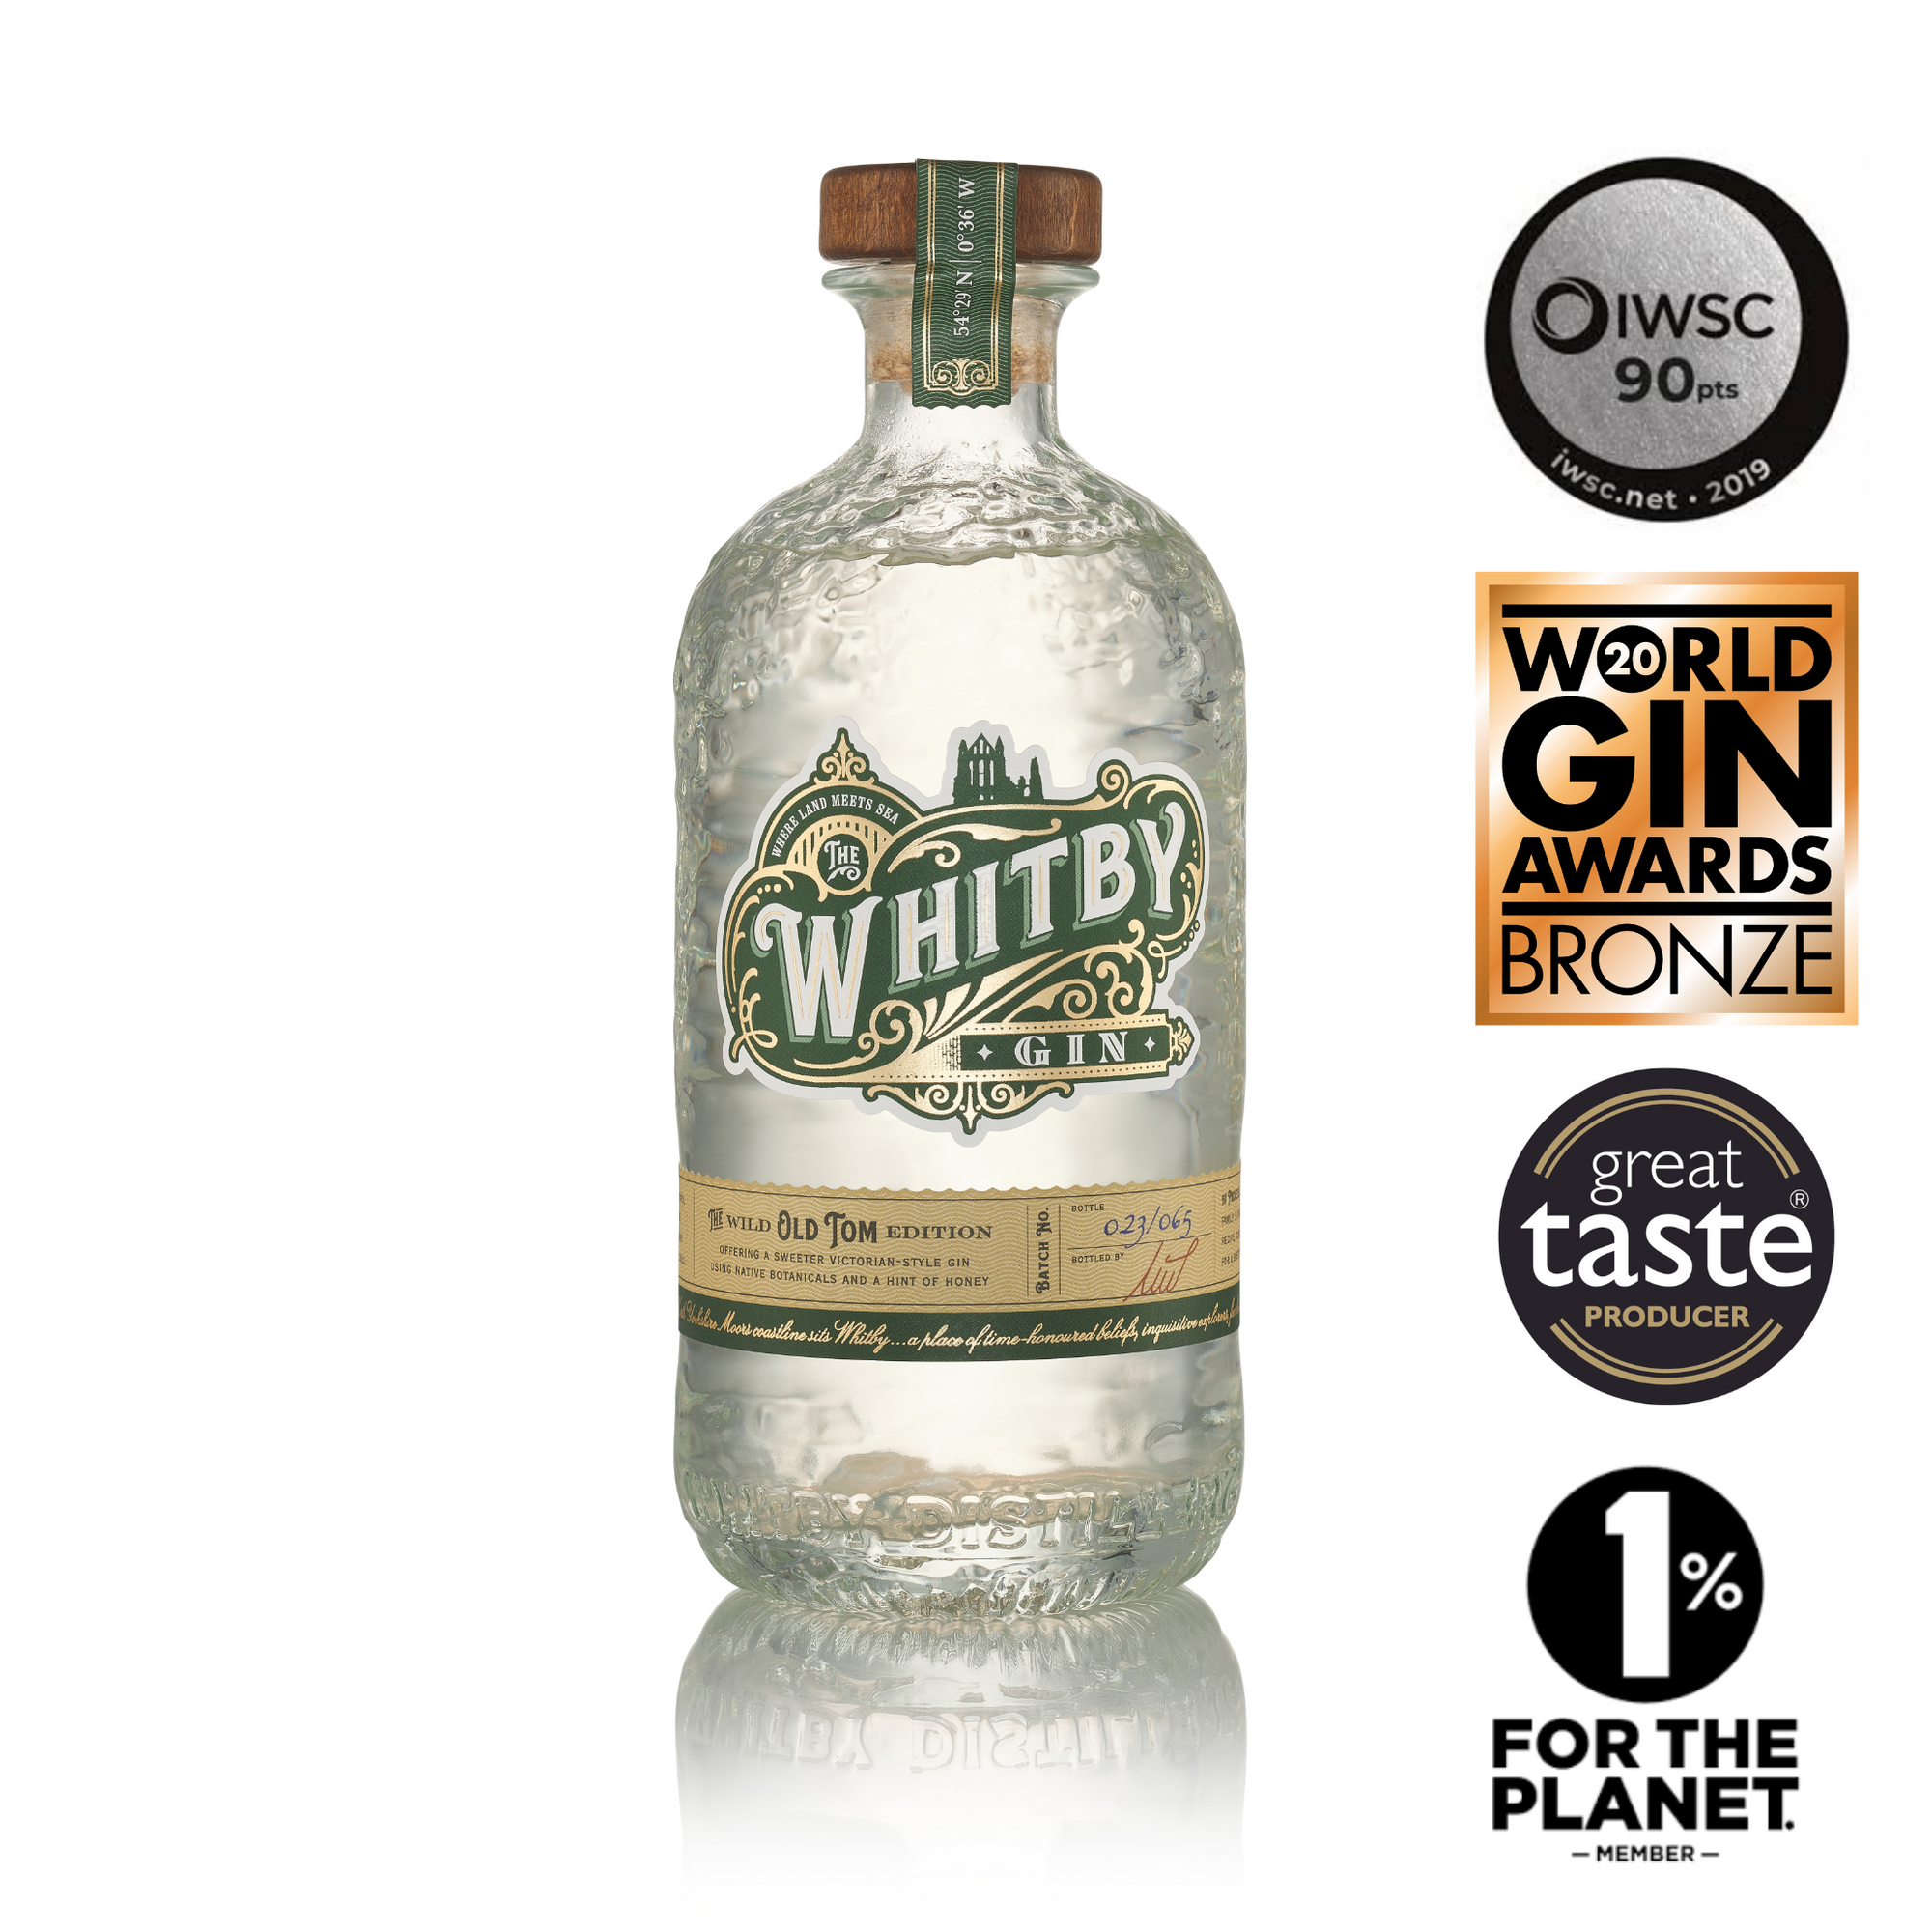 Whitby Gin - Wild Old Tom Edition